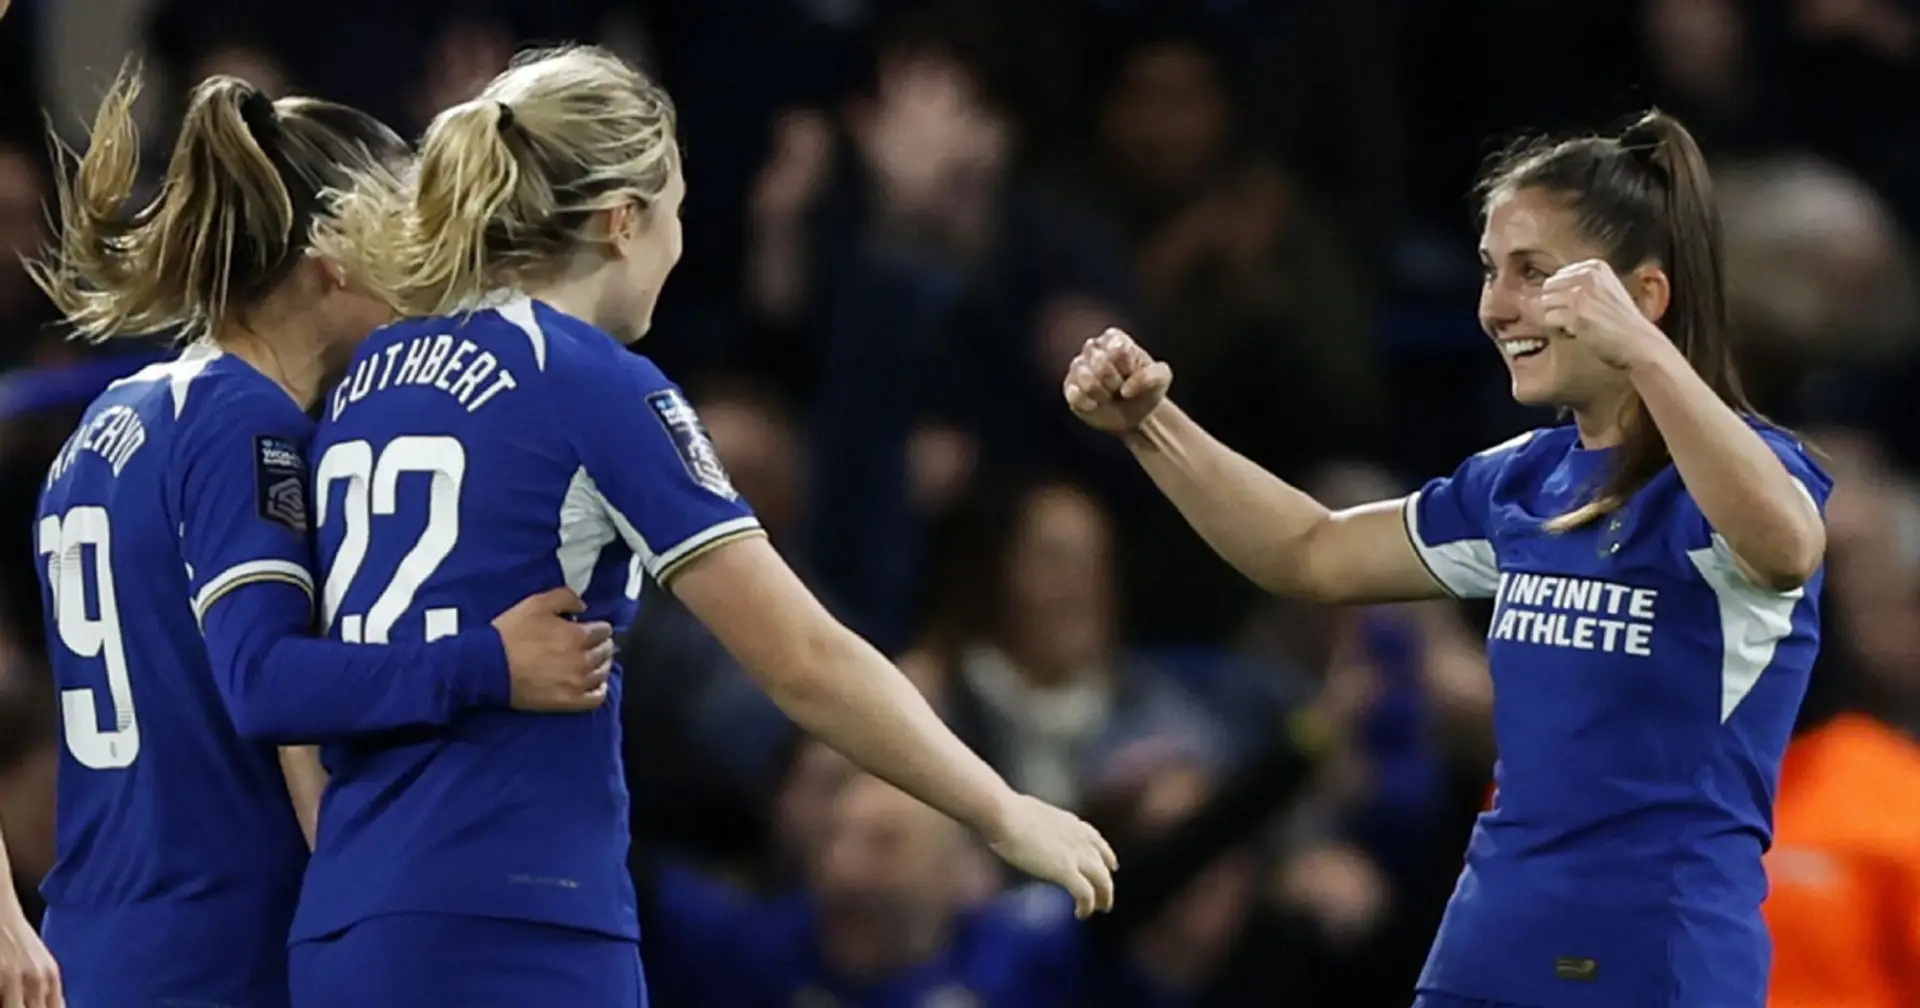 Chelsea Women make major WSL statement by beating Arsenal in front of record crowd